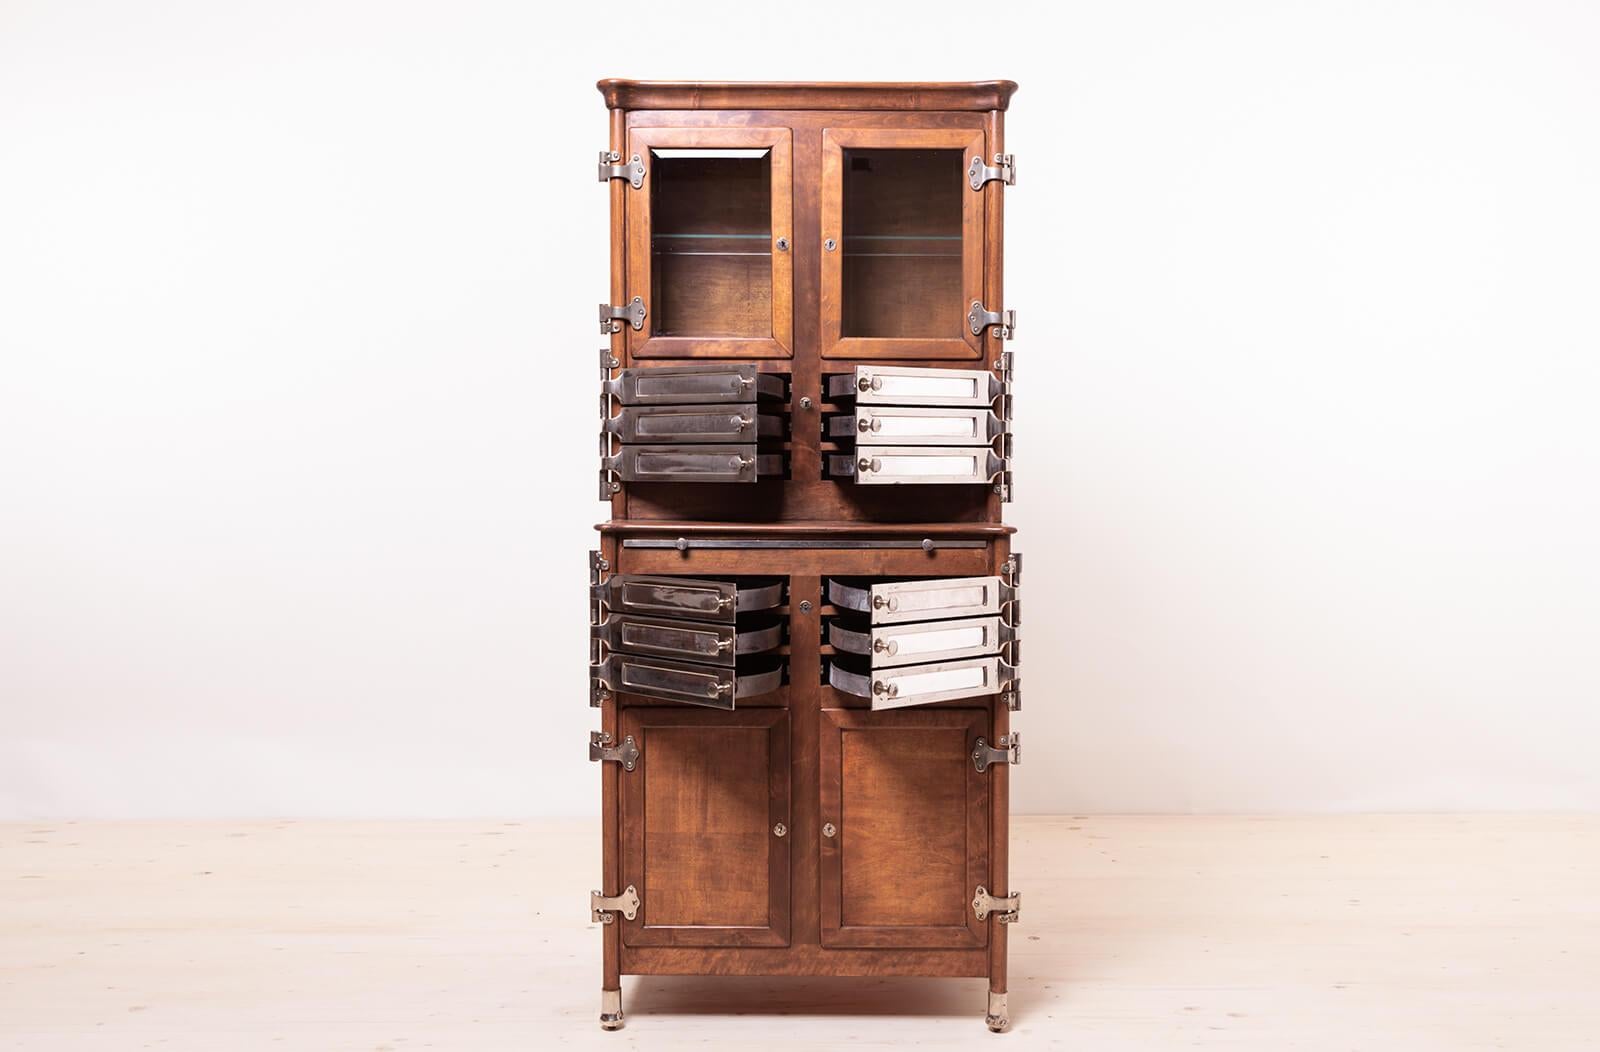 Dental Cabinet, Early 20th Century In Good Condition For Sale In Wrocław, Poland